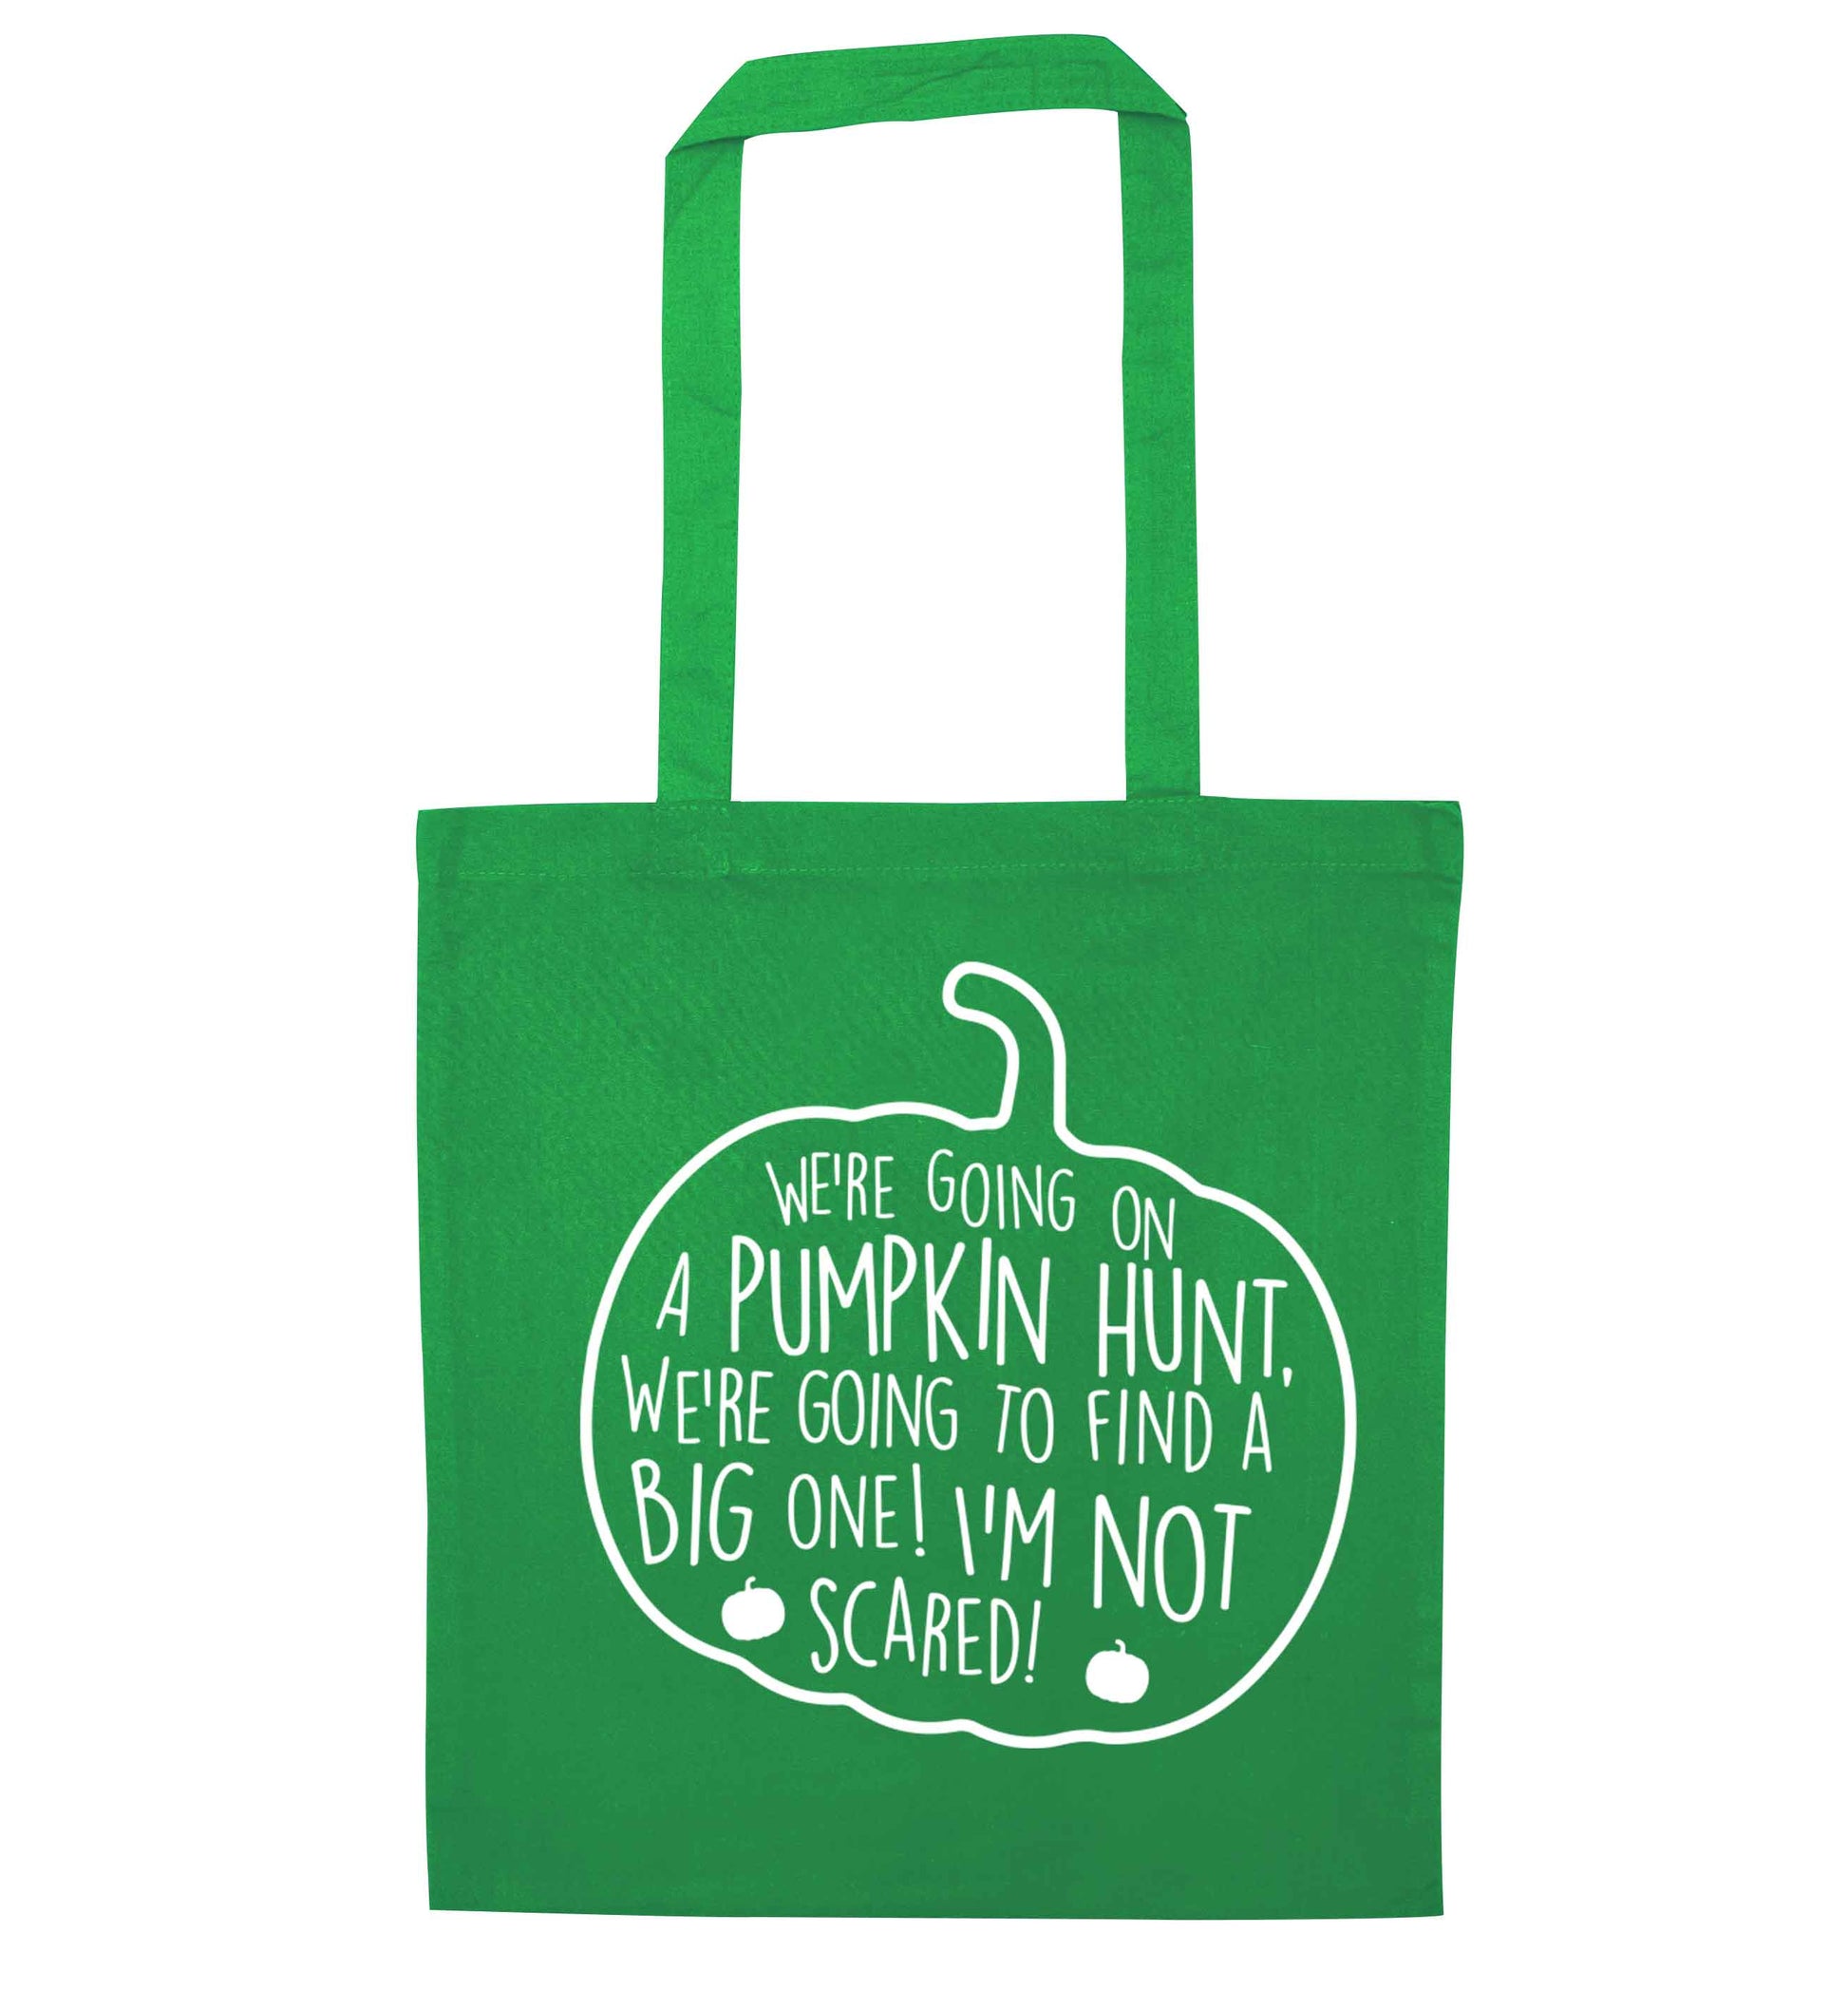 We're going on a pumpkin hunt green tote bag